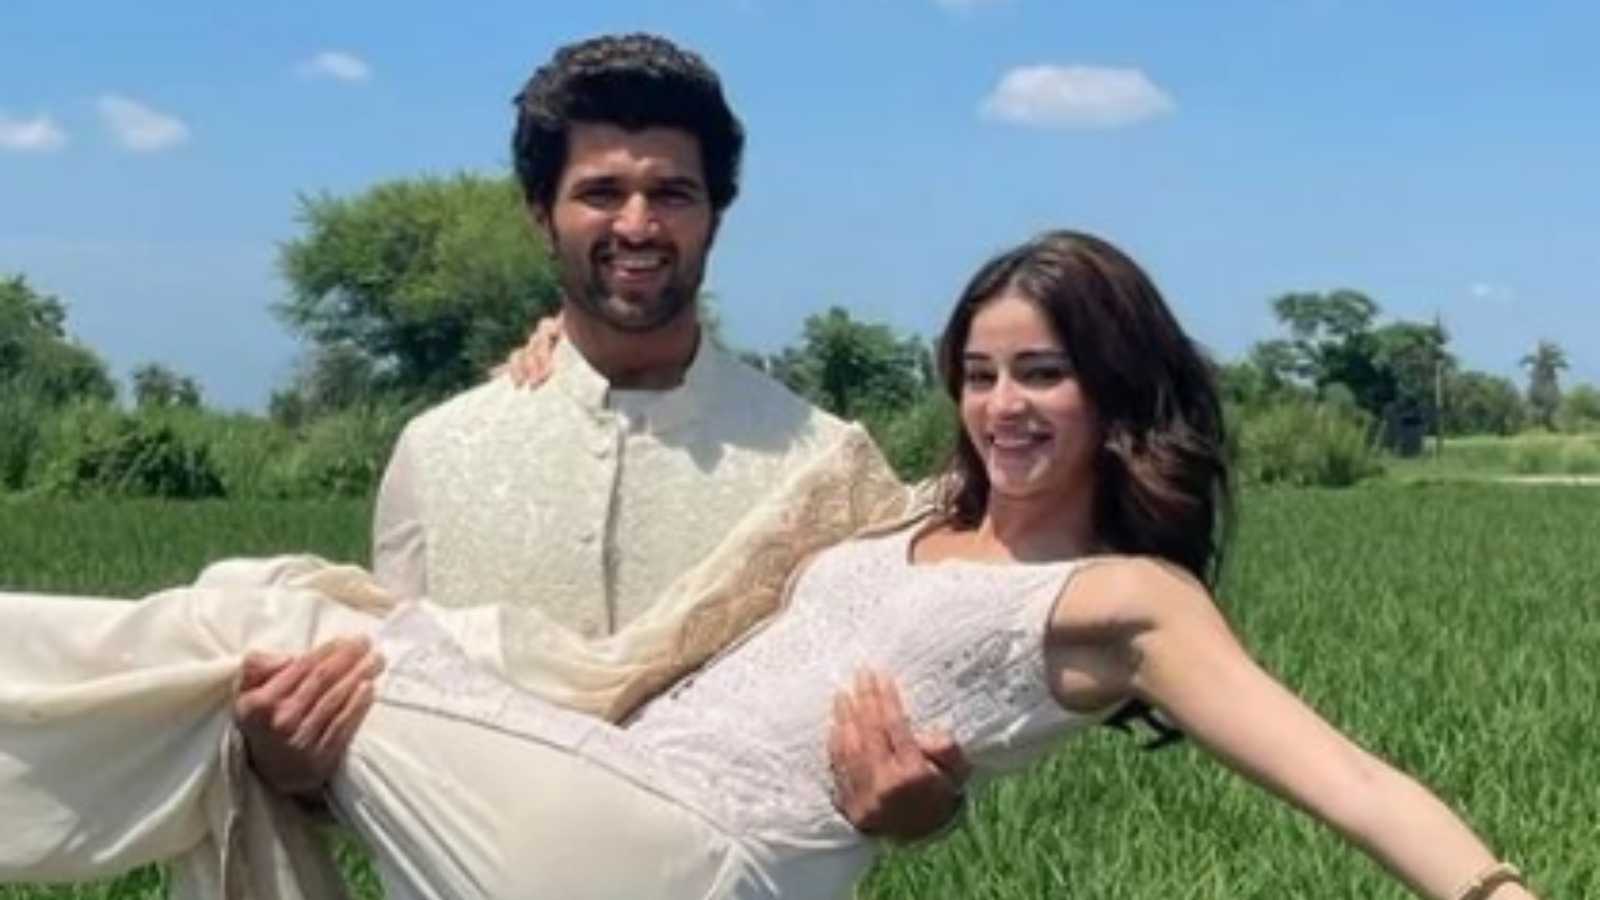 Amid dating rumours Vijay Deverakonda and Ananya Panday are turning heads in Chandigarh for this reason